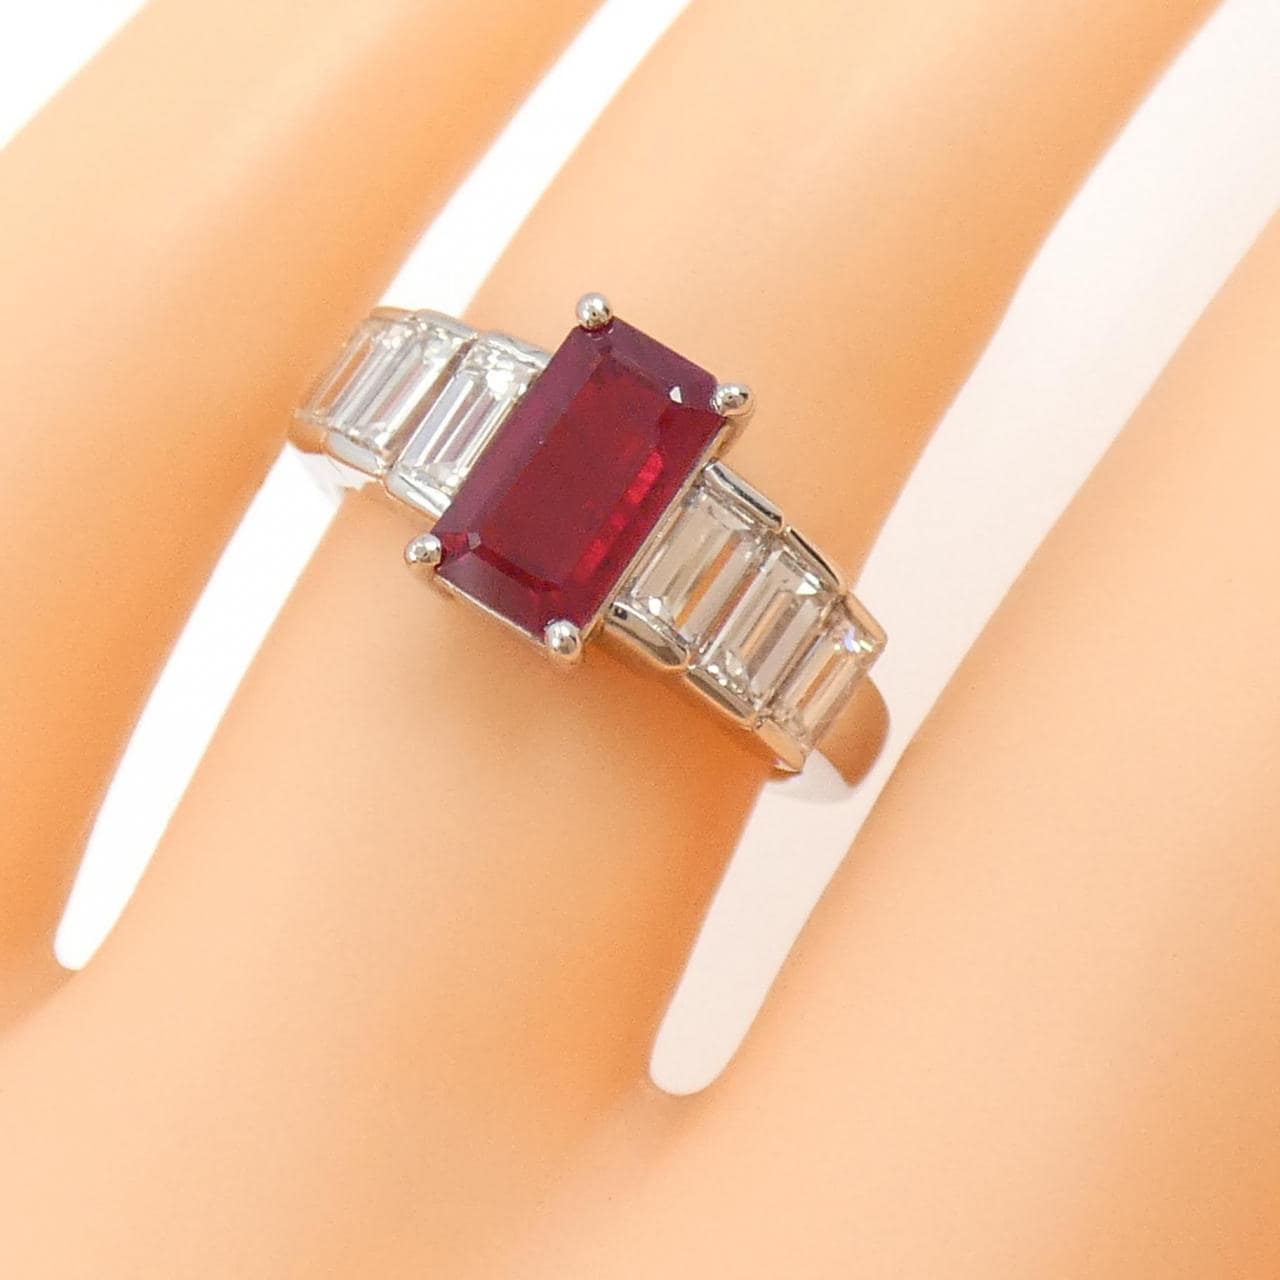 PT Ruby Ring 1.57CT Made in Burma